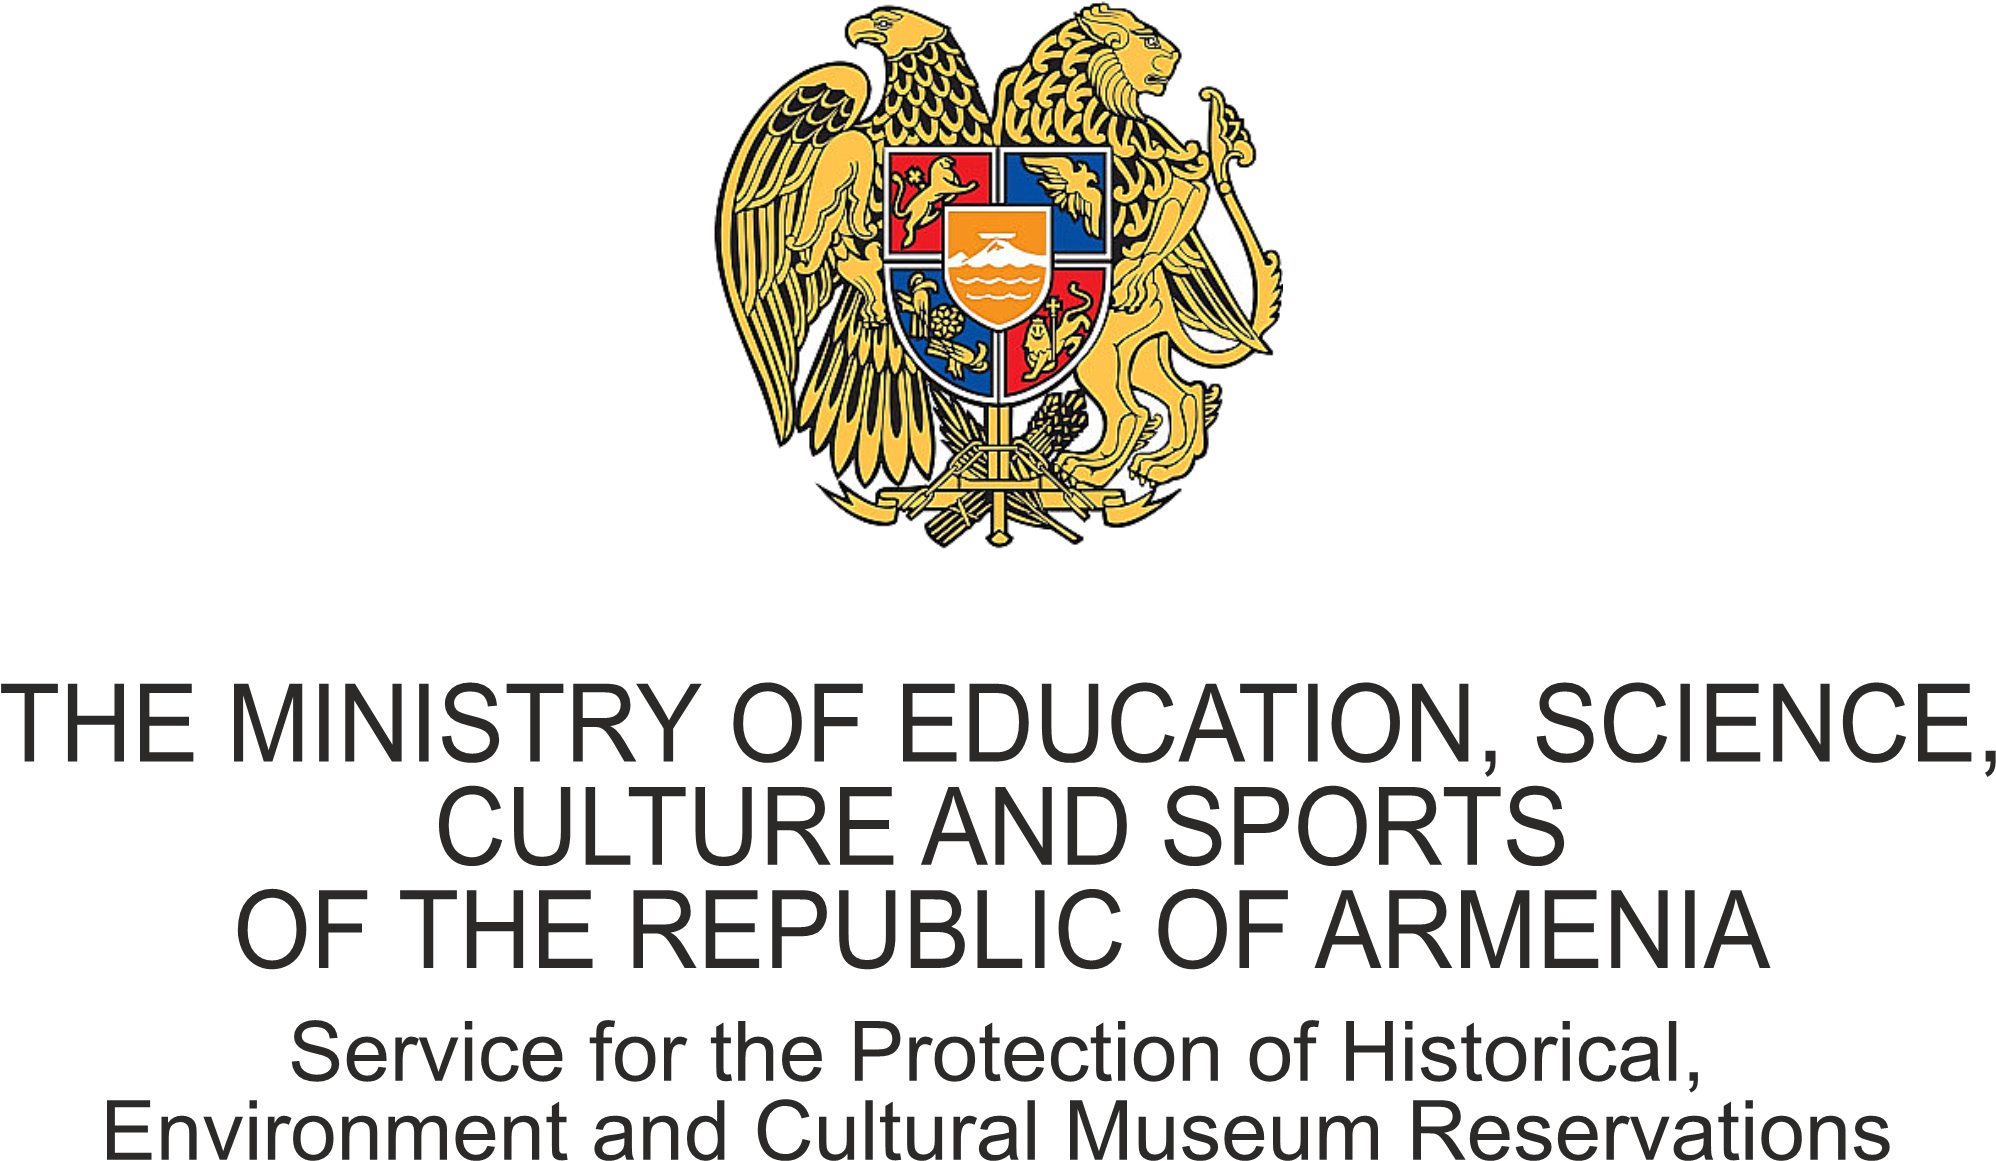 Service for the protection of historical environment and cultural museum reservation” SNCO at the Ministry of Education, Science, Culture and Sports of the Republic of Armenia